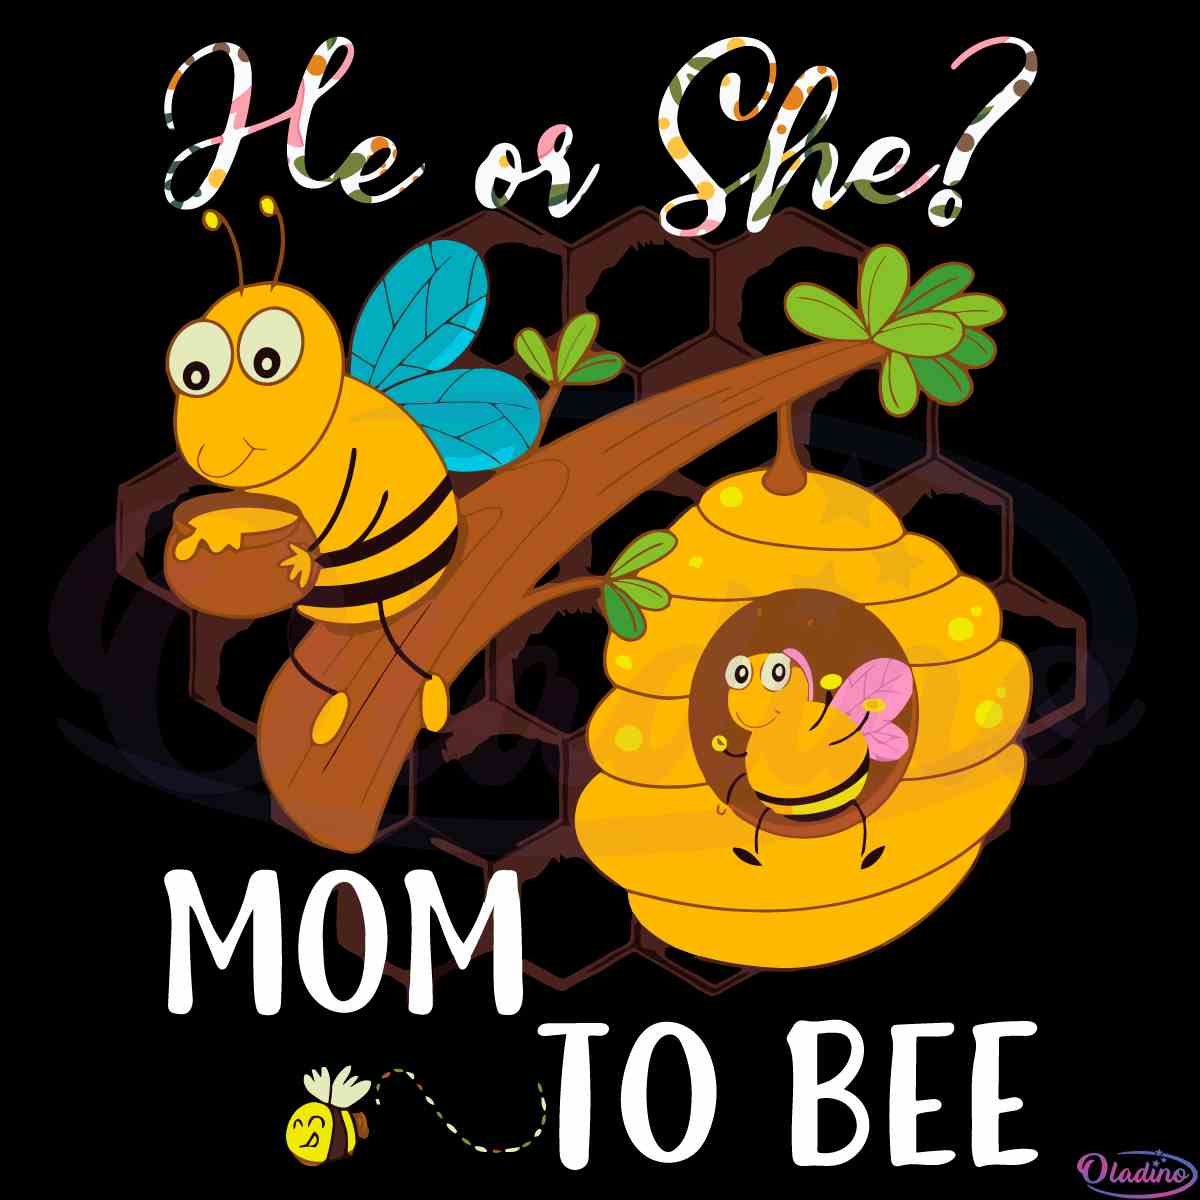 mom-to-bee-svg-retro-mother-bee-graphic-designs-cutting-files